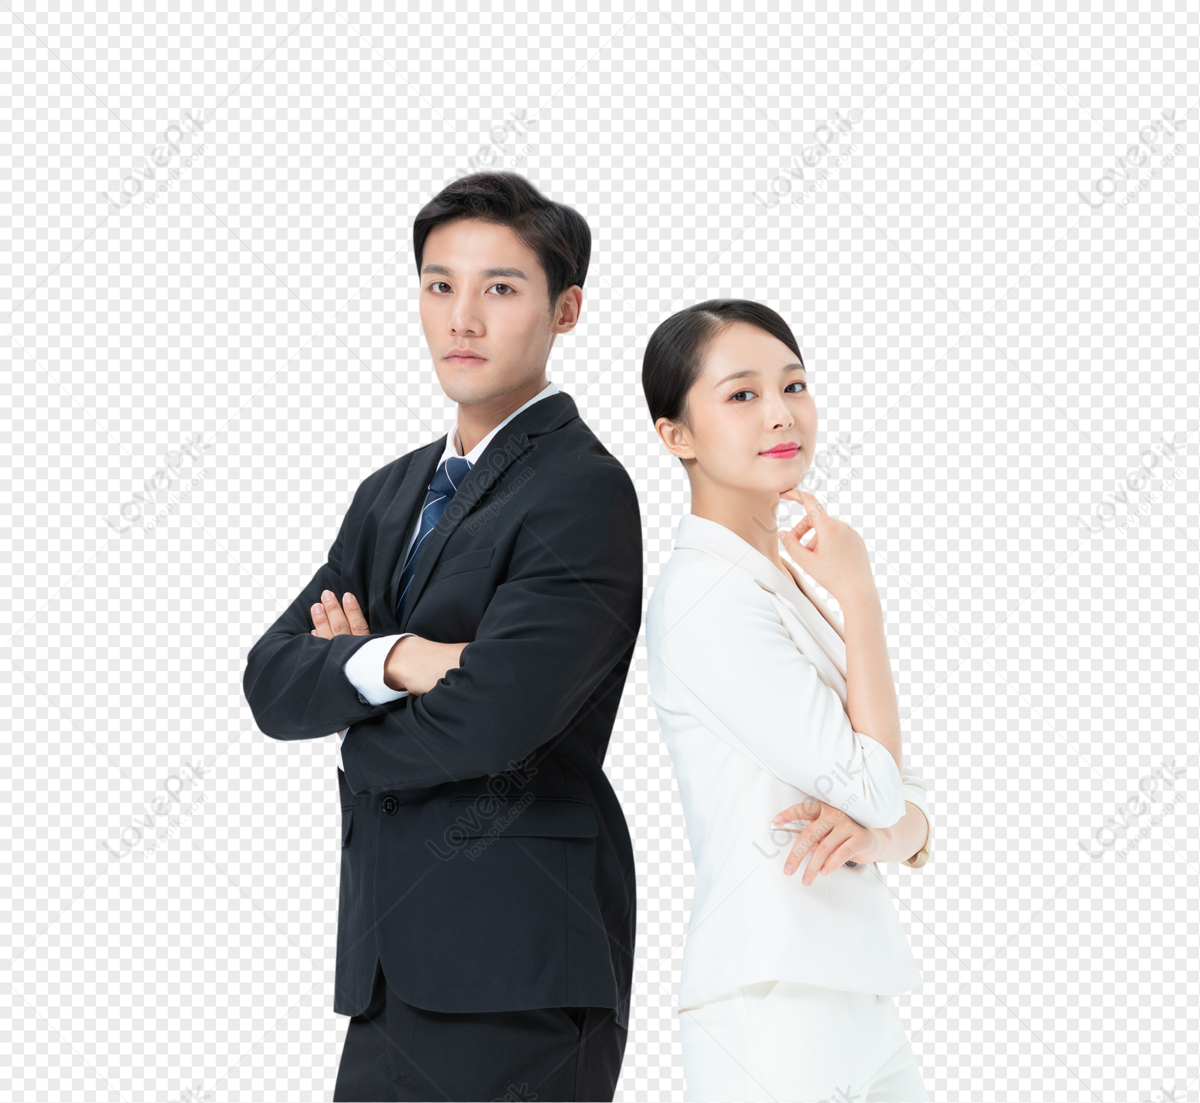 Business Men And Women Professional Image PNG Transparent Background And  Clipart Image For Free Download - Lovepik | 401645890